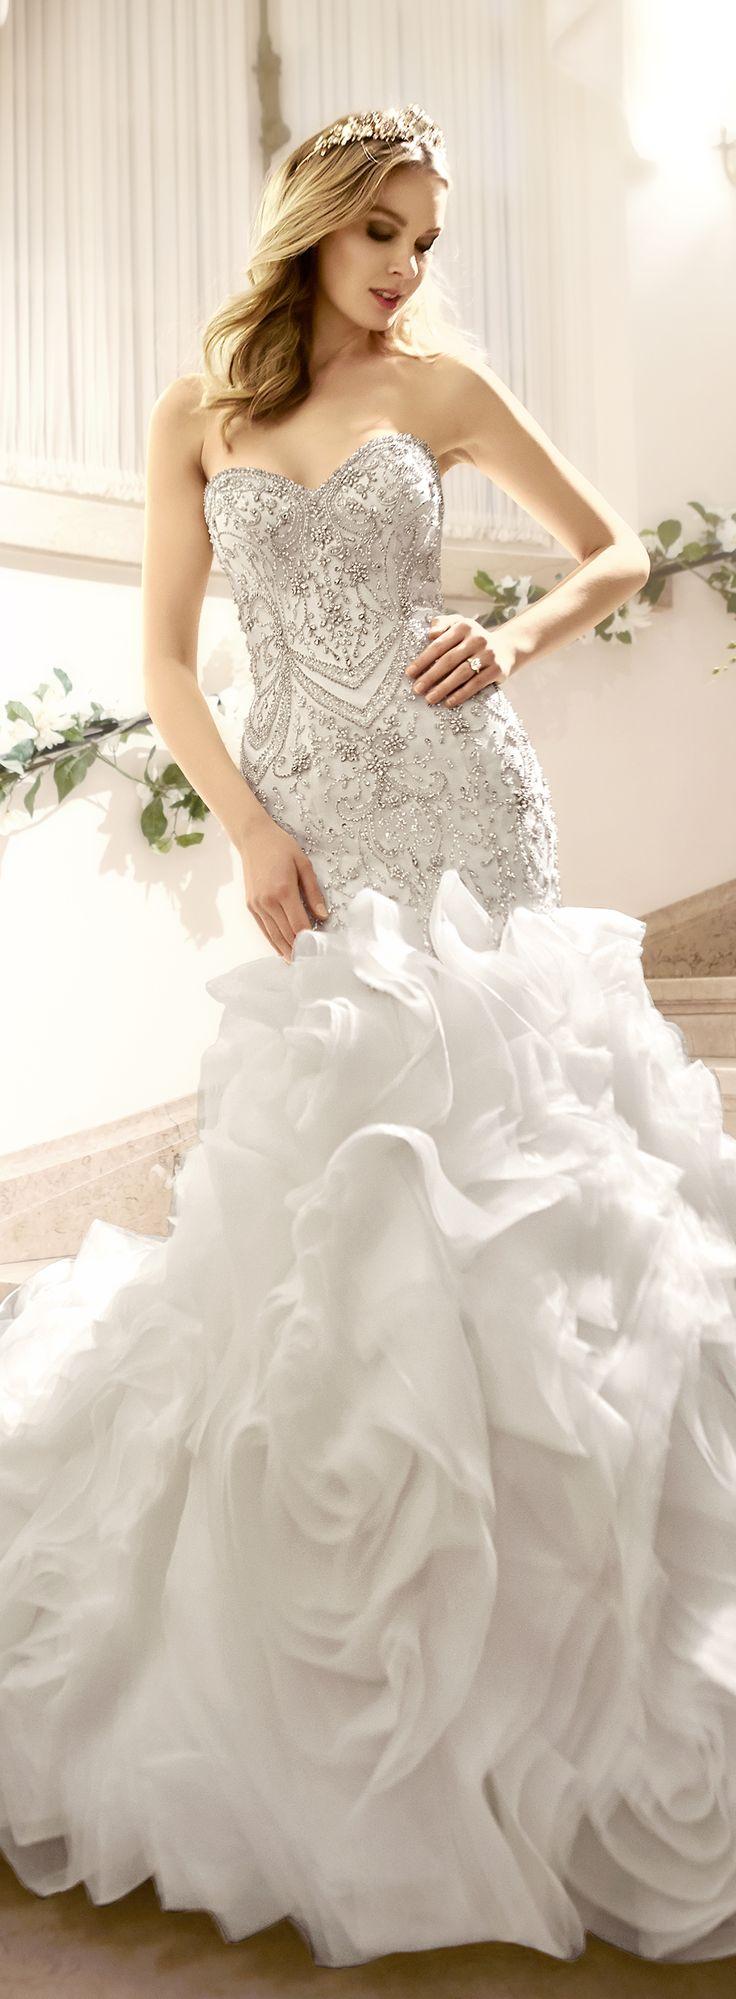 Hochzeit - Wedding Dress With Beaded Bodice And Textured Skirt 